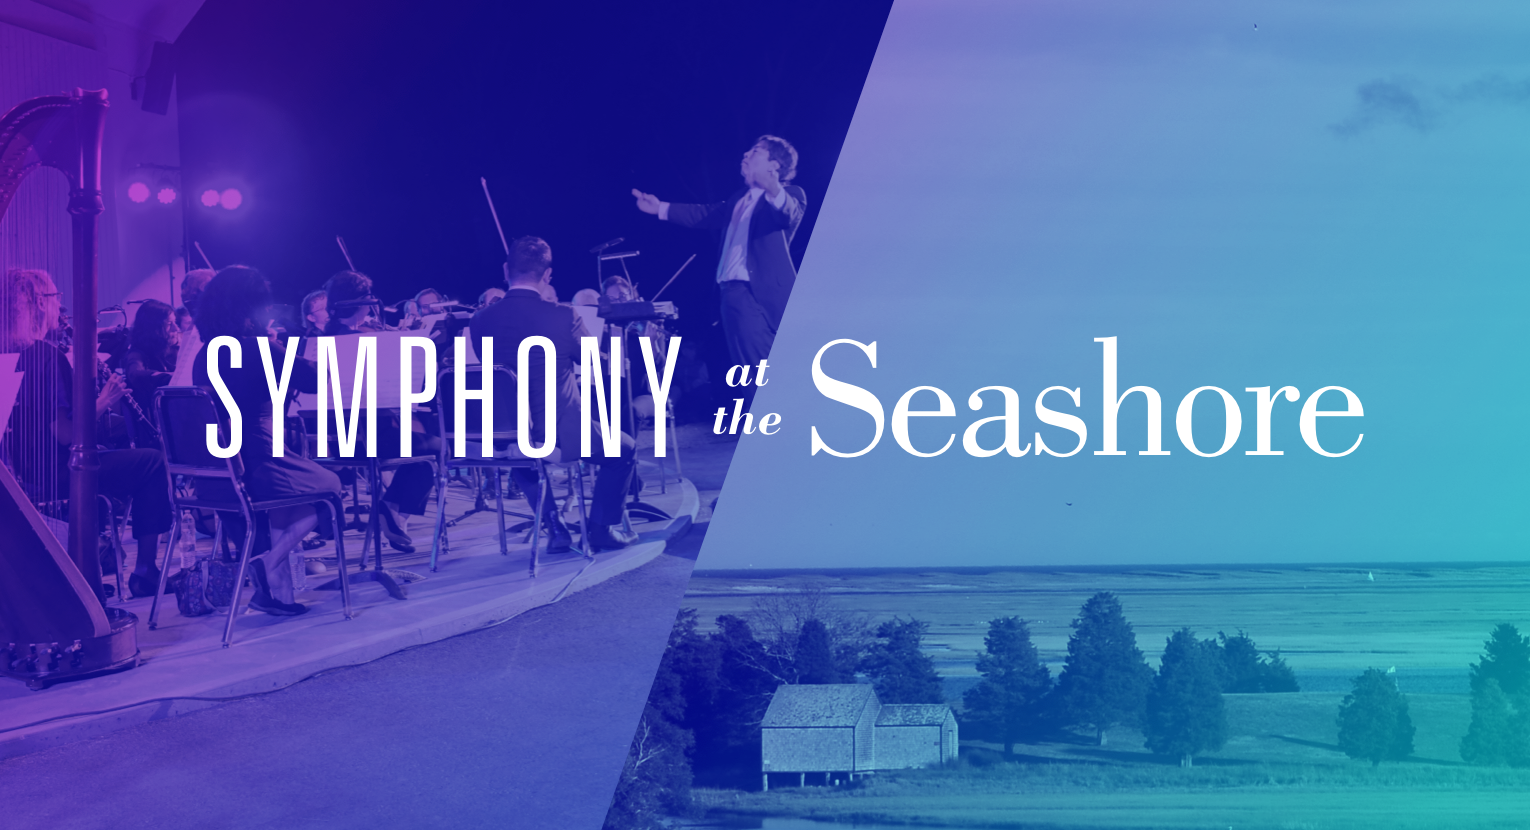 Symphony at the Seashore graphic 2022